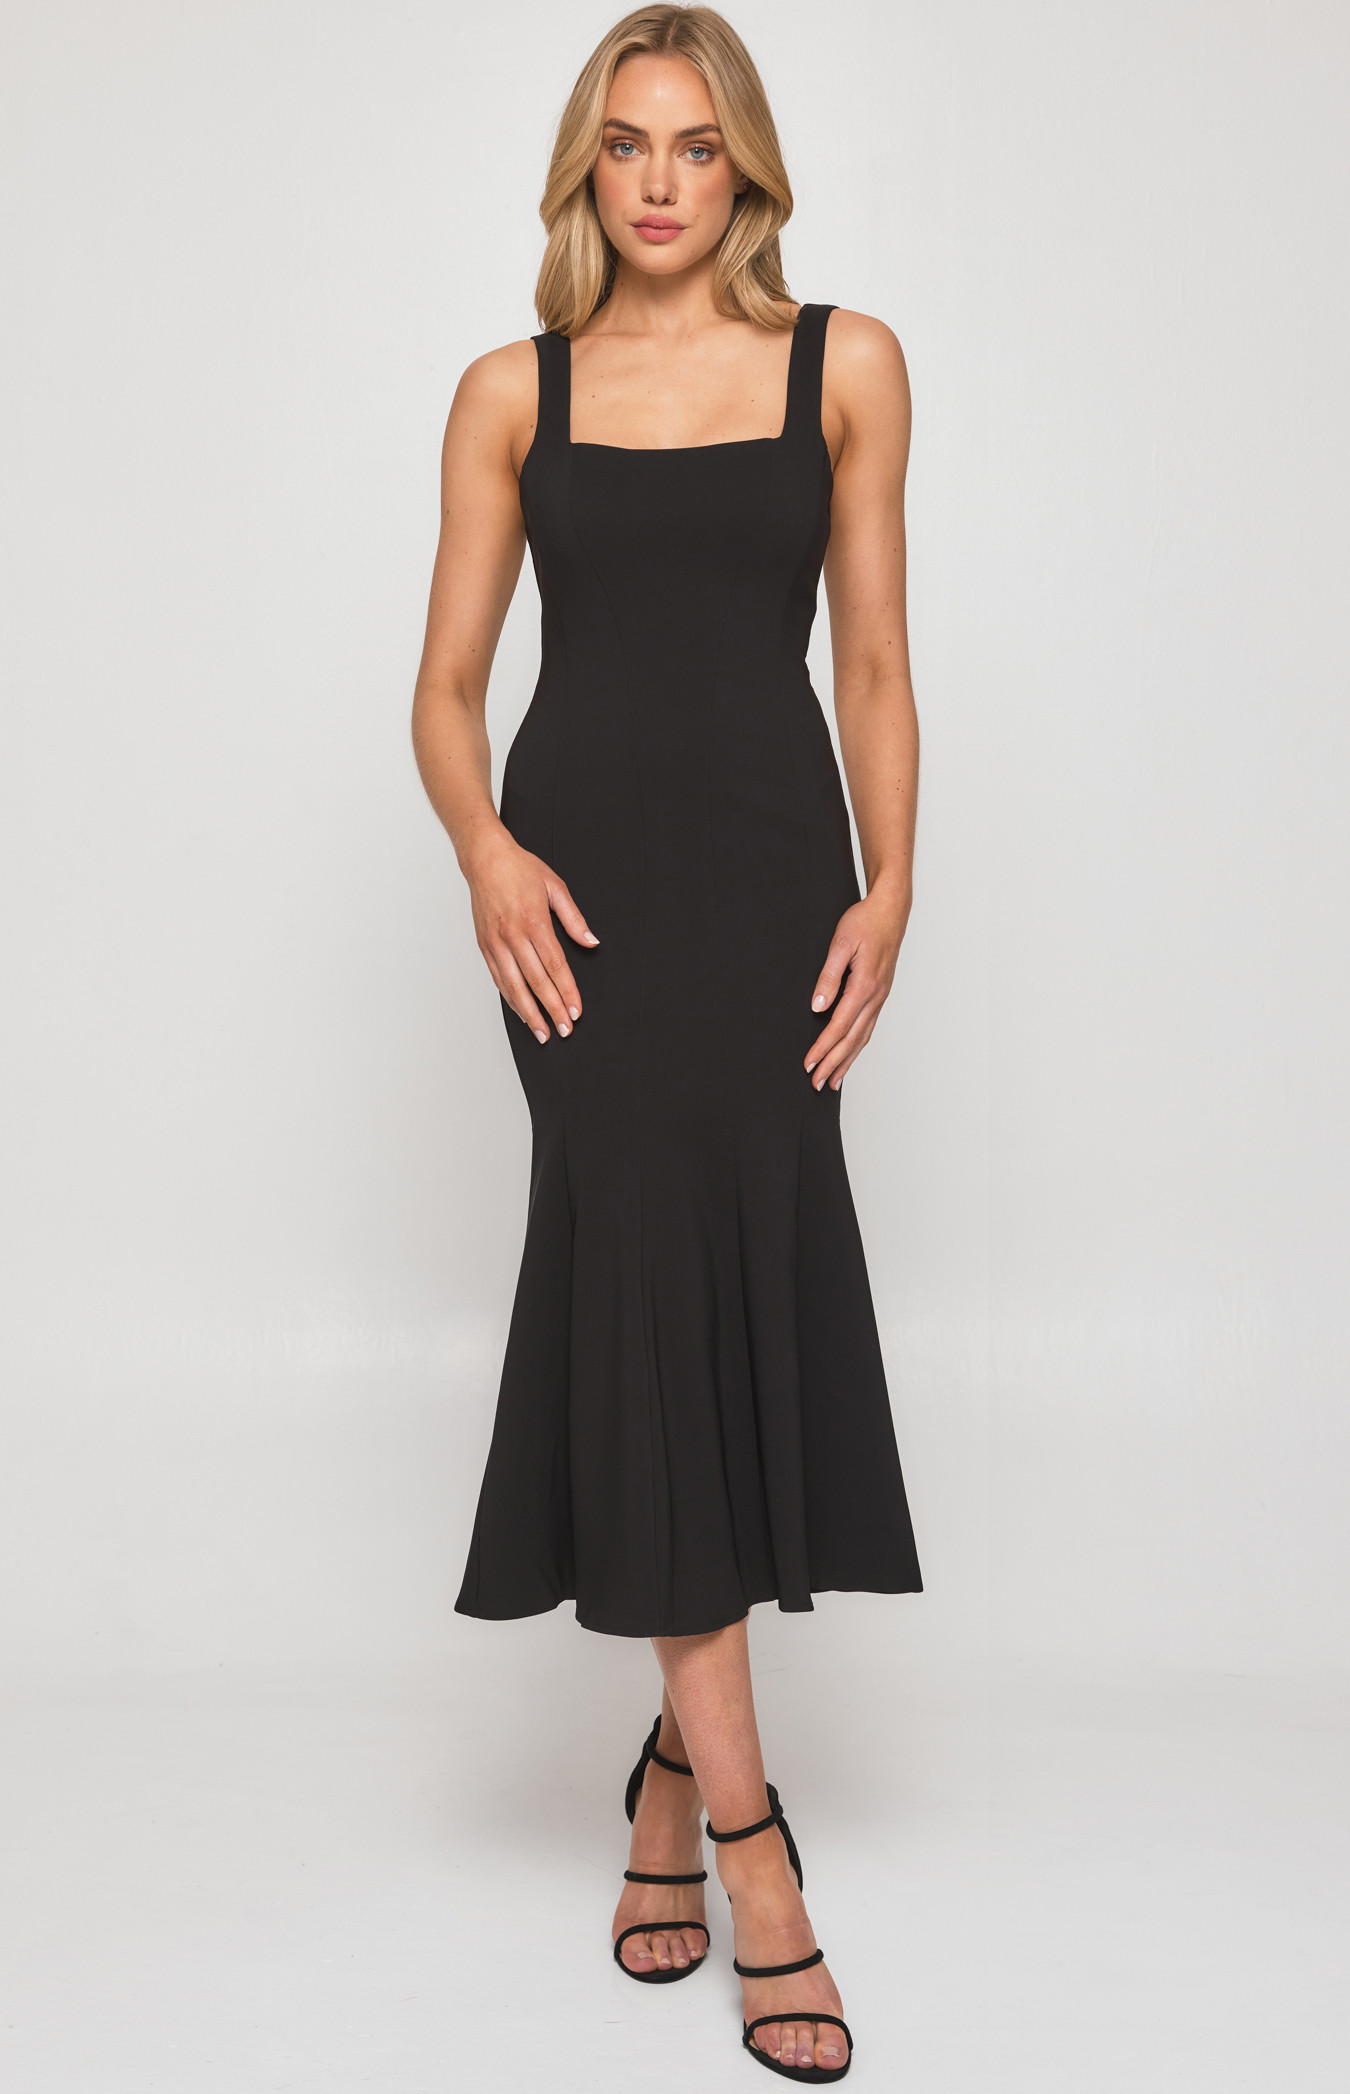 Square Neckline Fishtail Midi Dress with Panel Detailing (SDR1250A)